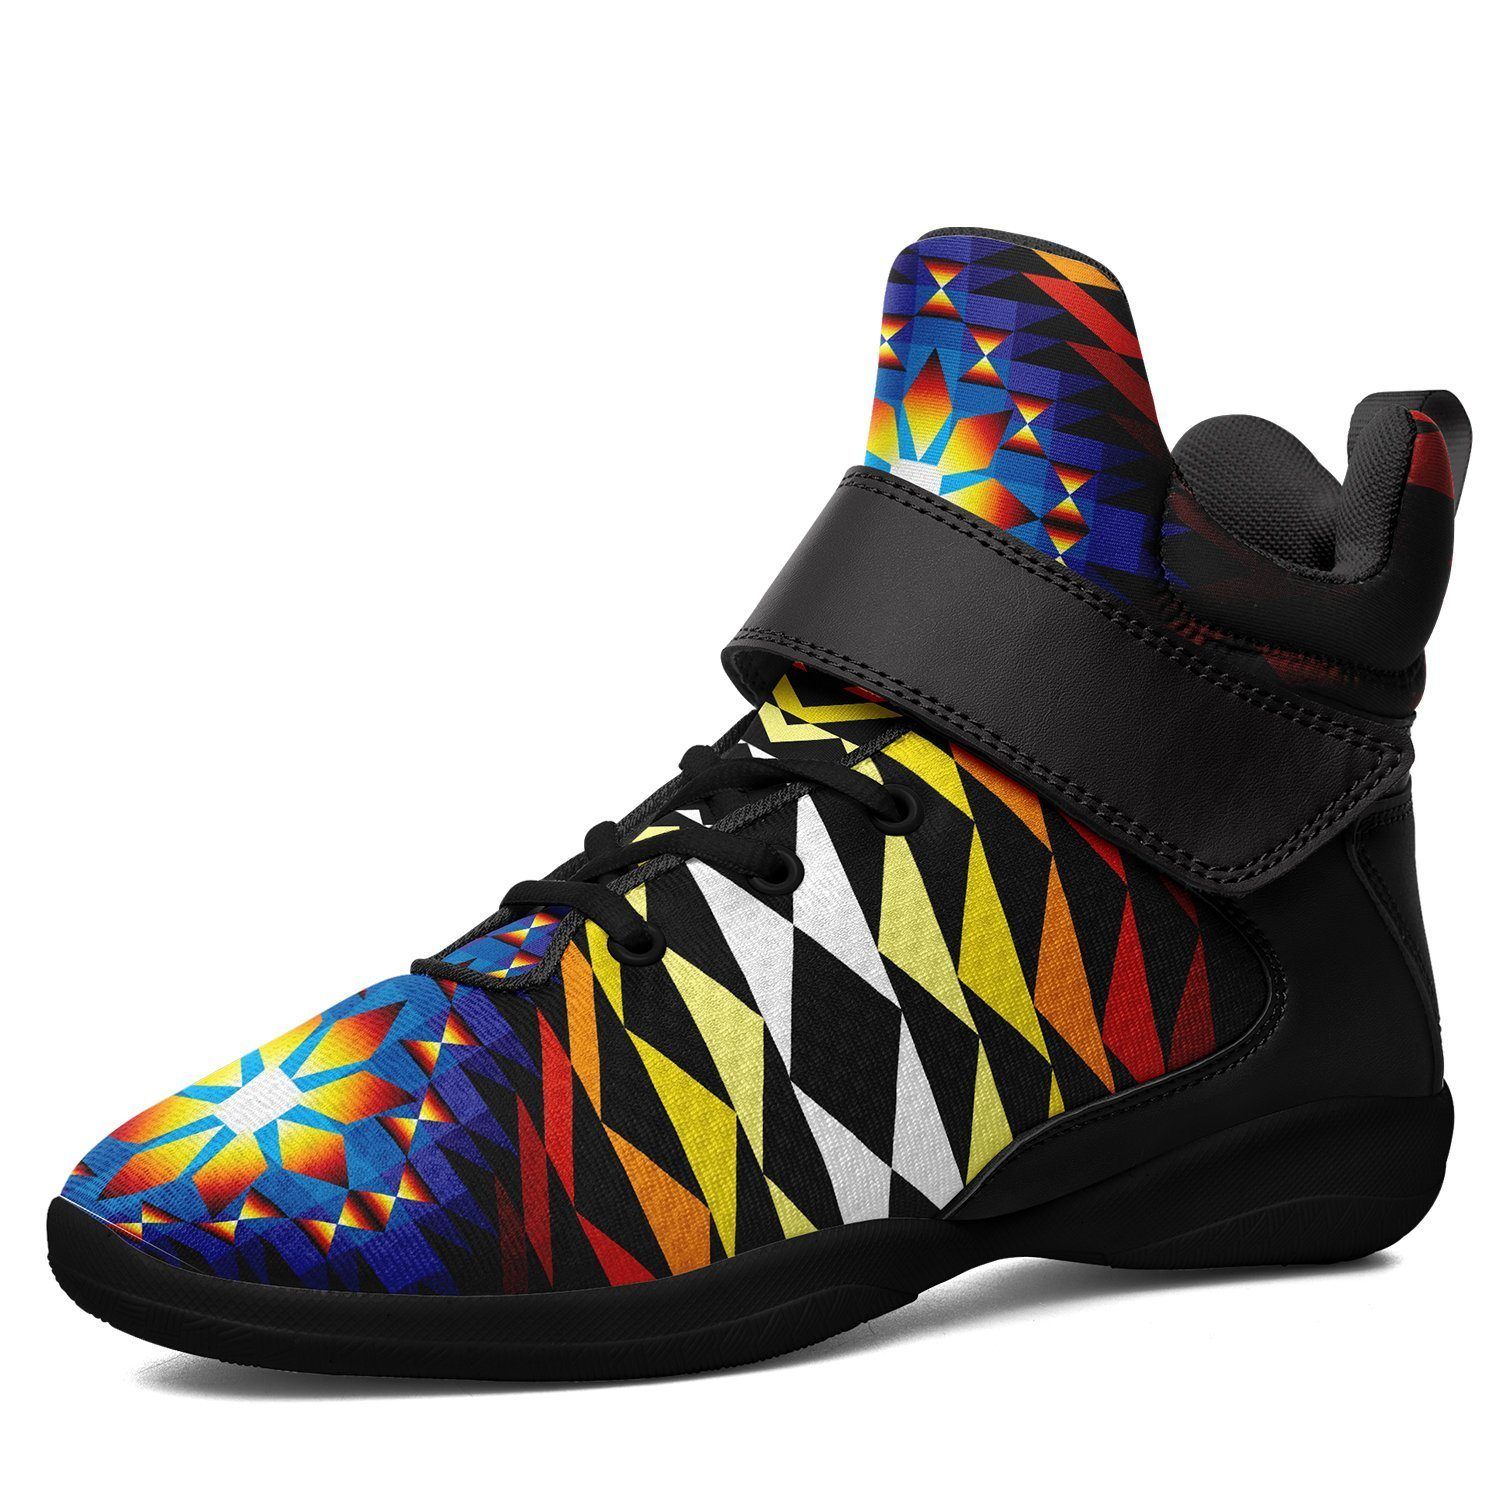 Sunset Blanket Ipottaa Basketball / Sport High Top Shoes - Black Sole 49 Dzine US Men 7 / EUR 40 Black Sole with Black Strap 